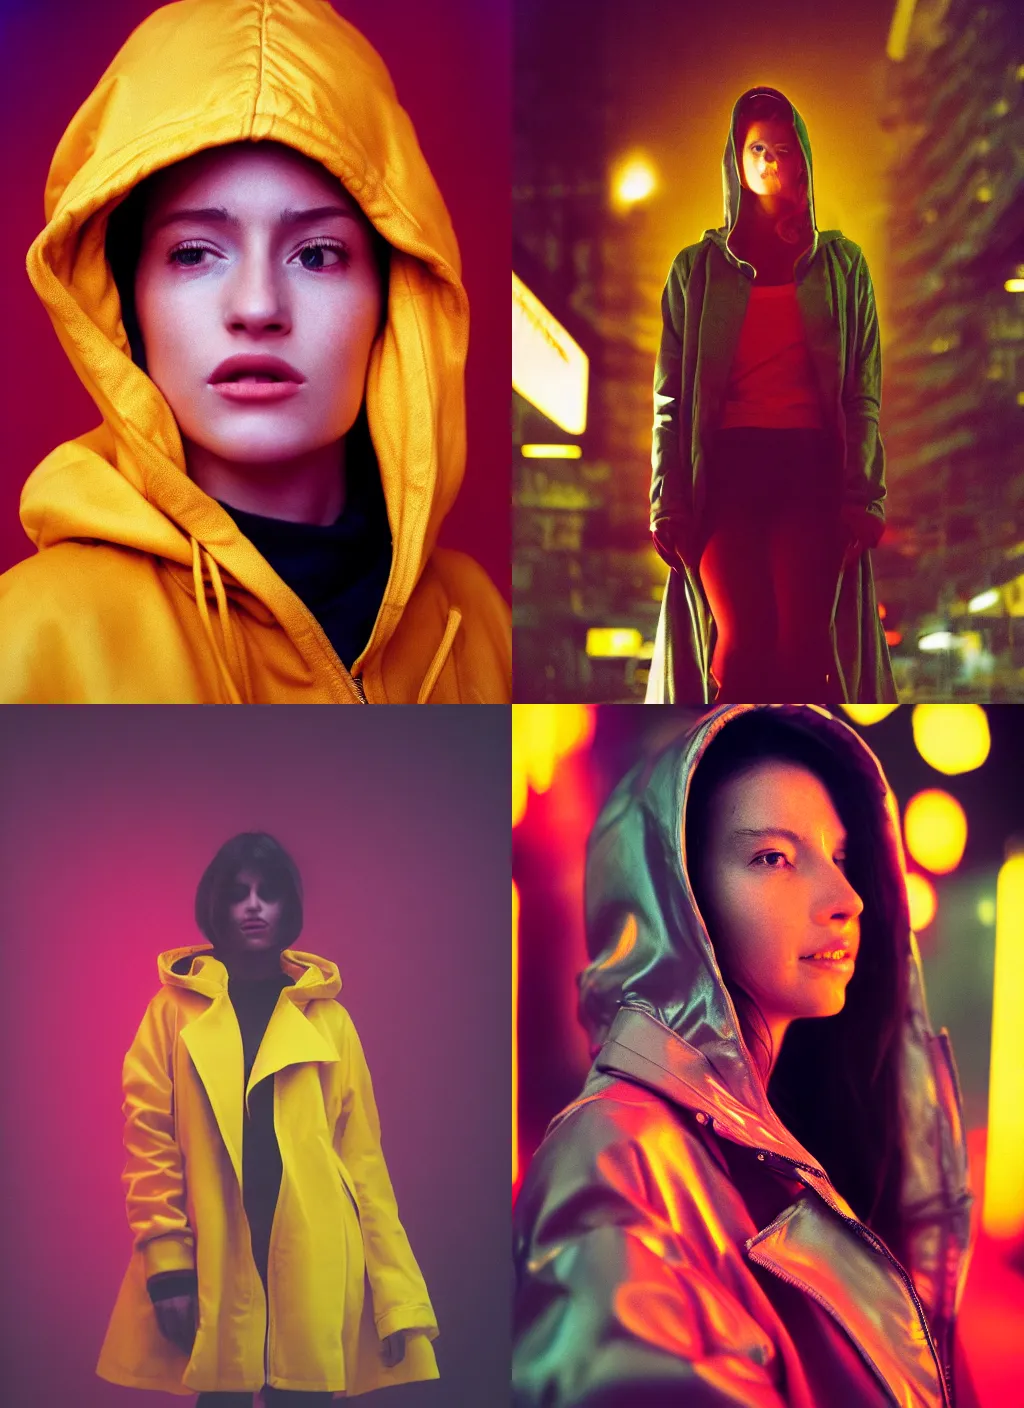 Prompt: A hyper realistic and detailed head portrait photography of a woman wearing a futuristic yellow raincoat with hoodie by annie leibovitz. Neo noir style. Cinematic. Swirly bokeh. Red neon lights and glow in the background. Cinestill 800T film. Lens flare.